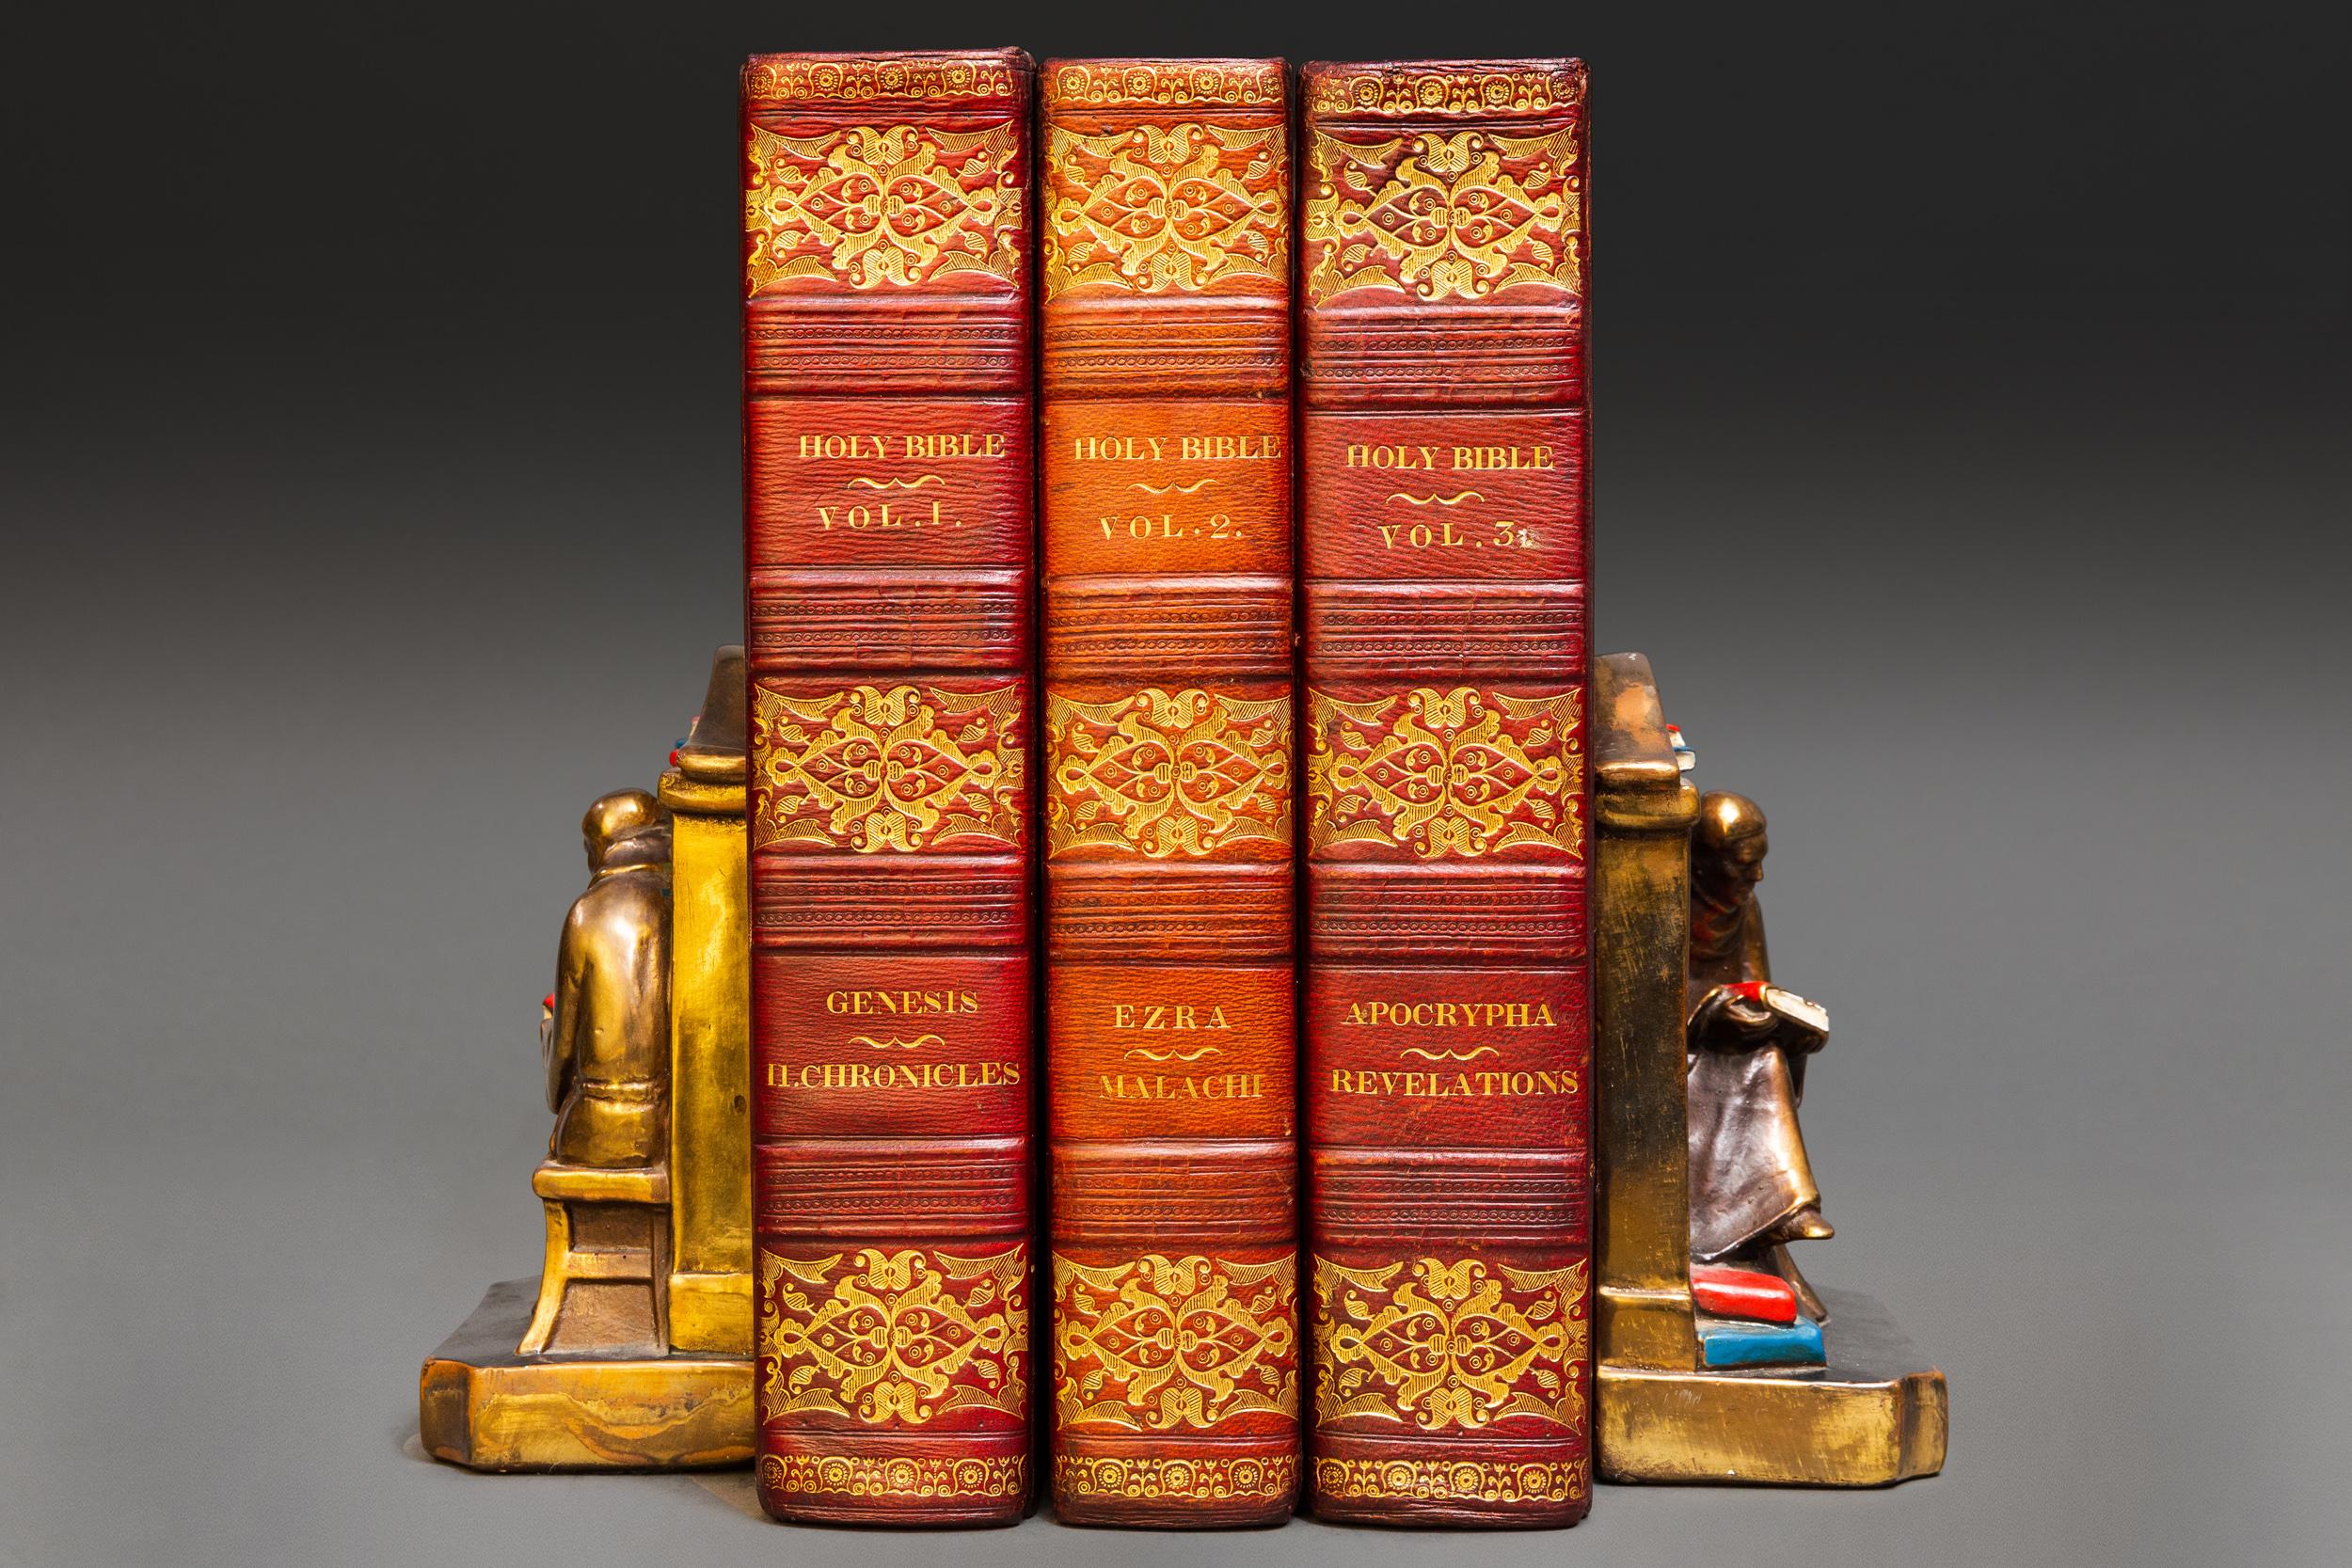 3 volumes. The Holy Bible- containing the old and new testaments. Bound in full red morocco. Decorative gilt-tooled pattern on covers. Decorative gilt on spines. All edges gilt. Cork endpapers. Raised bands. Translated out of the original tongues.